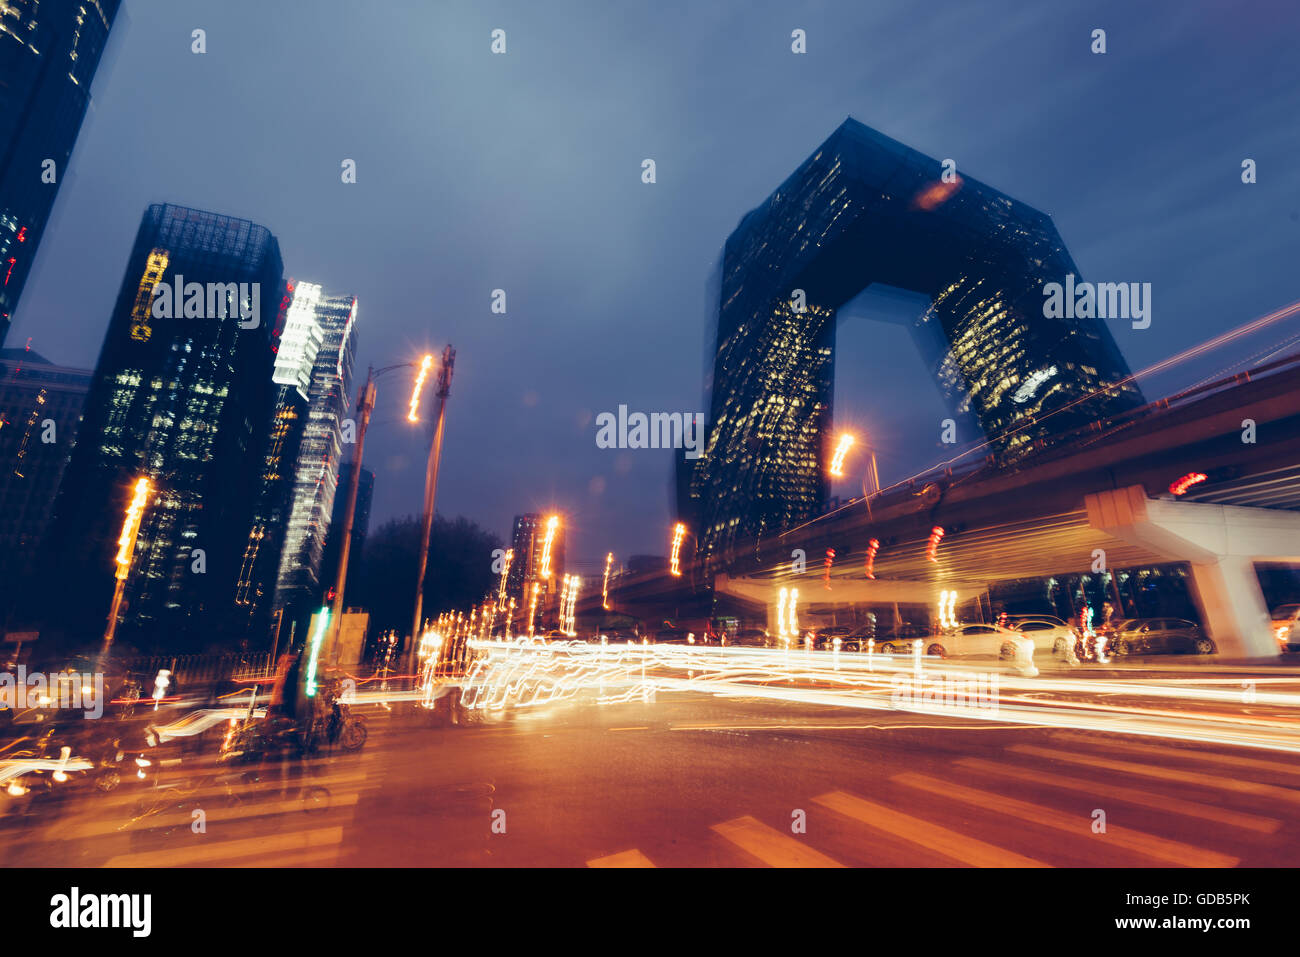 Stock Photo - Beijing, China - October 25, 2015: Abstract blurry image of a night view of CCTV Headquarters Beijing China at the Stock Photo